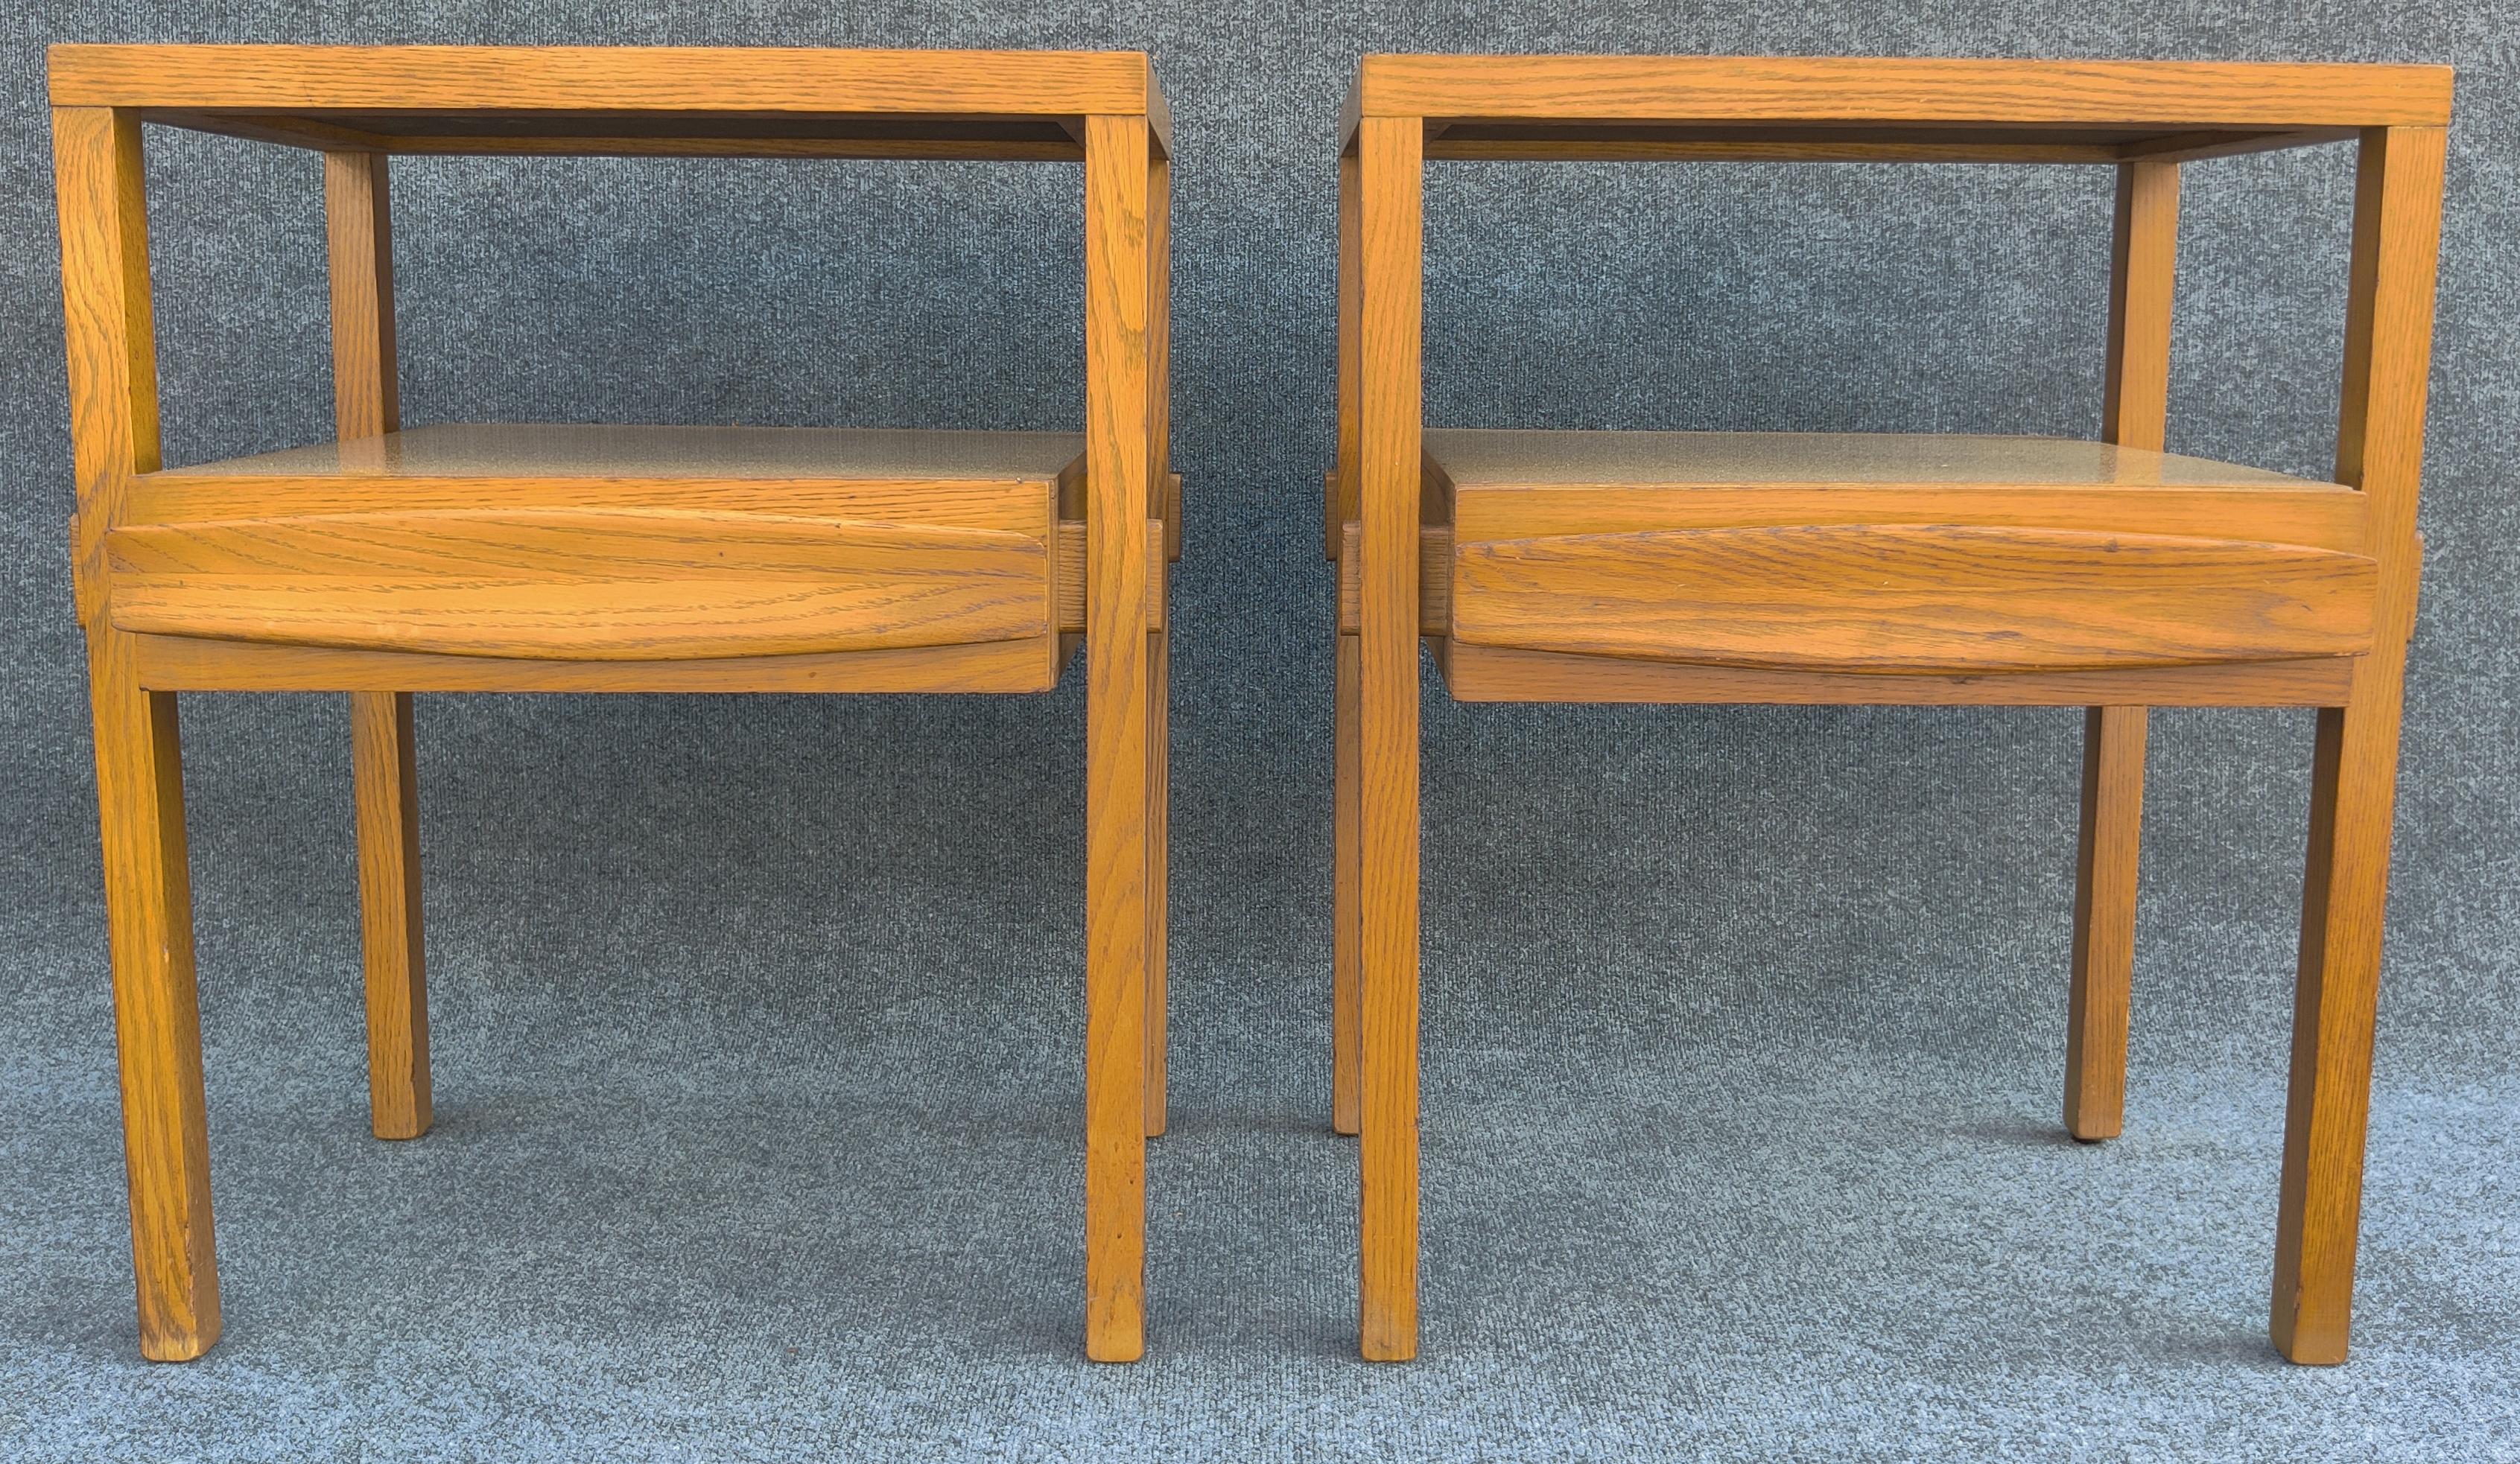 By Harold Schwartz for Romweber, this rare sculptural and architectural pair of nightstands or end tables is as cool as anything designed by Vladimir Kagan, Hans Wegner, or Finn Juhl. High quality construction paired with solid white oak, having